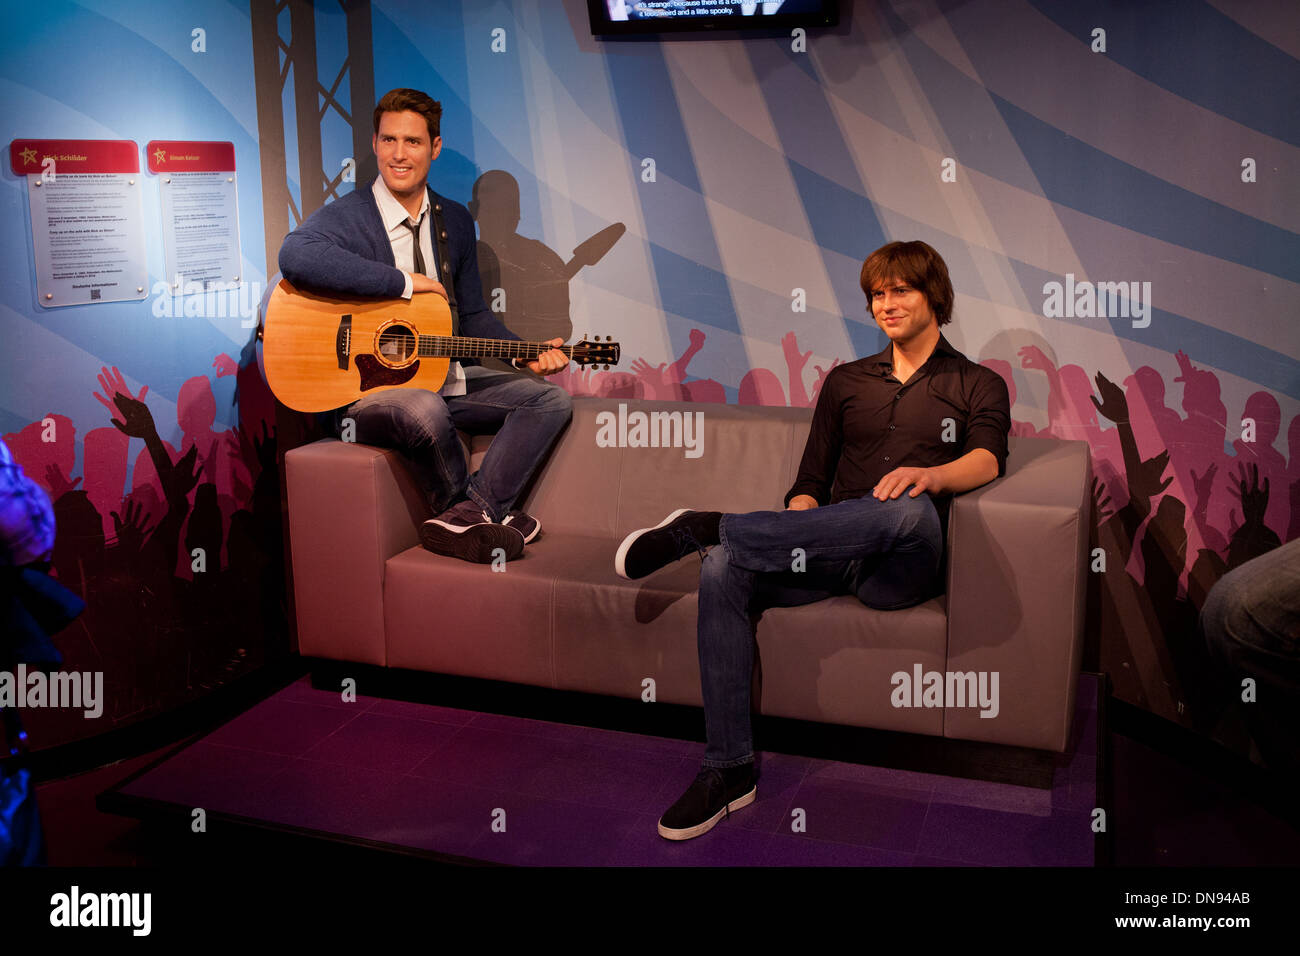 Nick Schilder and Simon Keizer wax figure in the Madame Tussauds Amsterdam in the Netherlands. Stock Photo